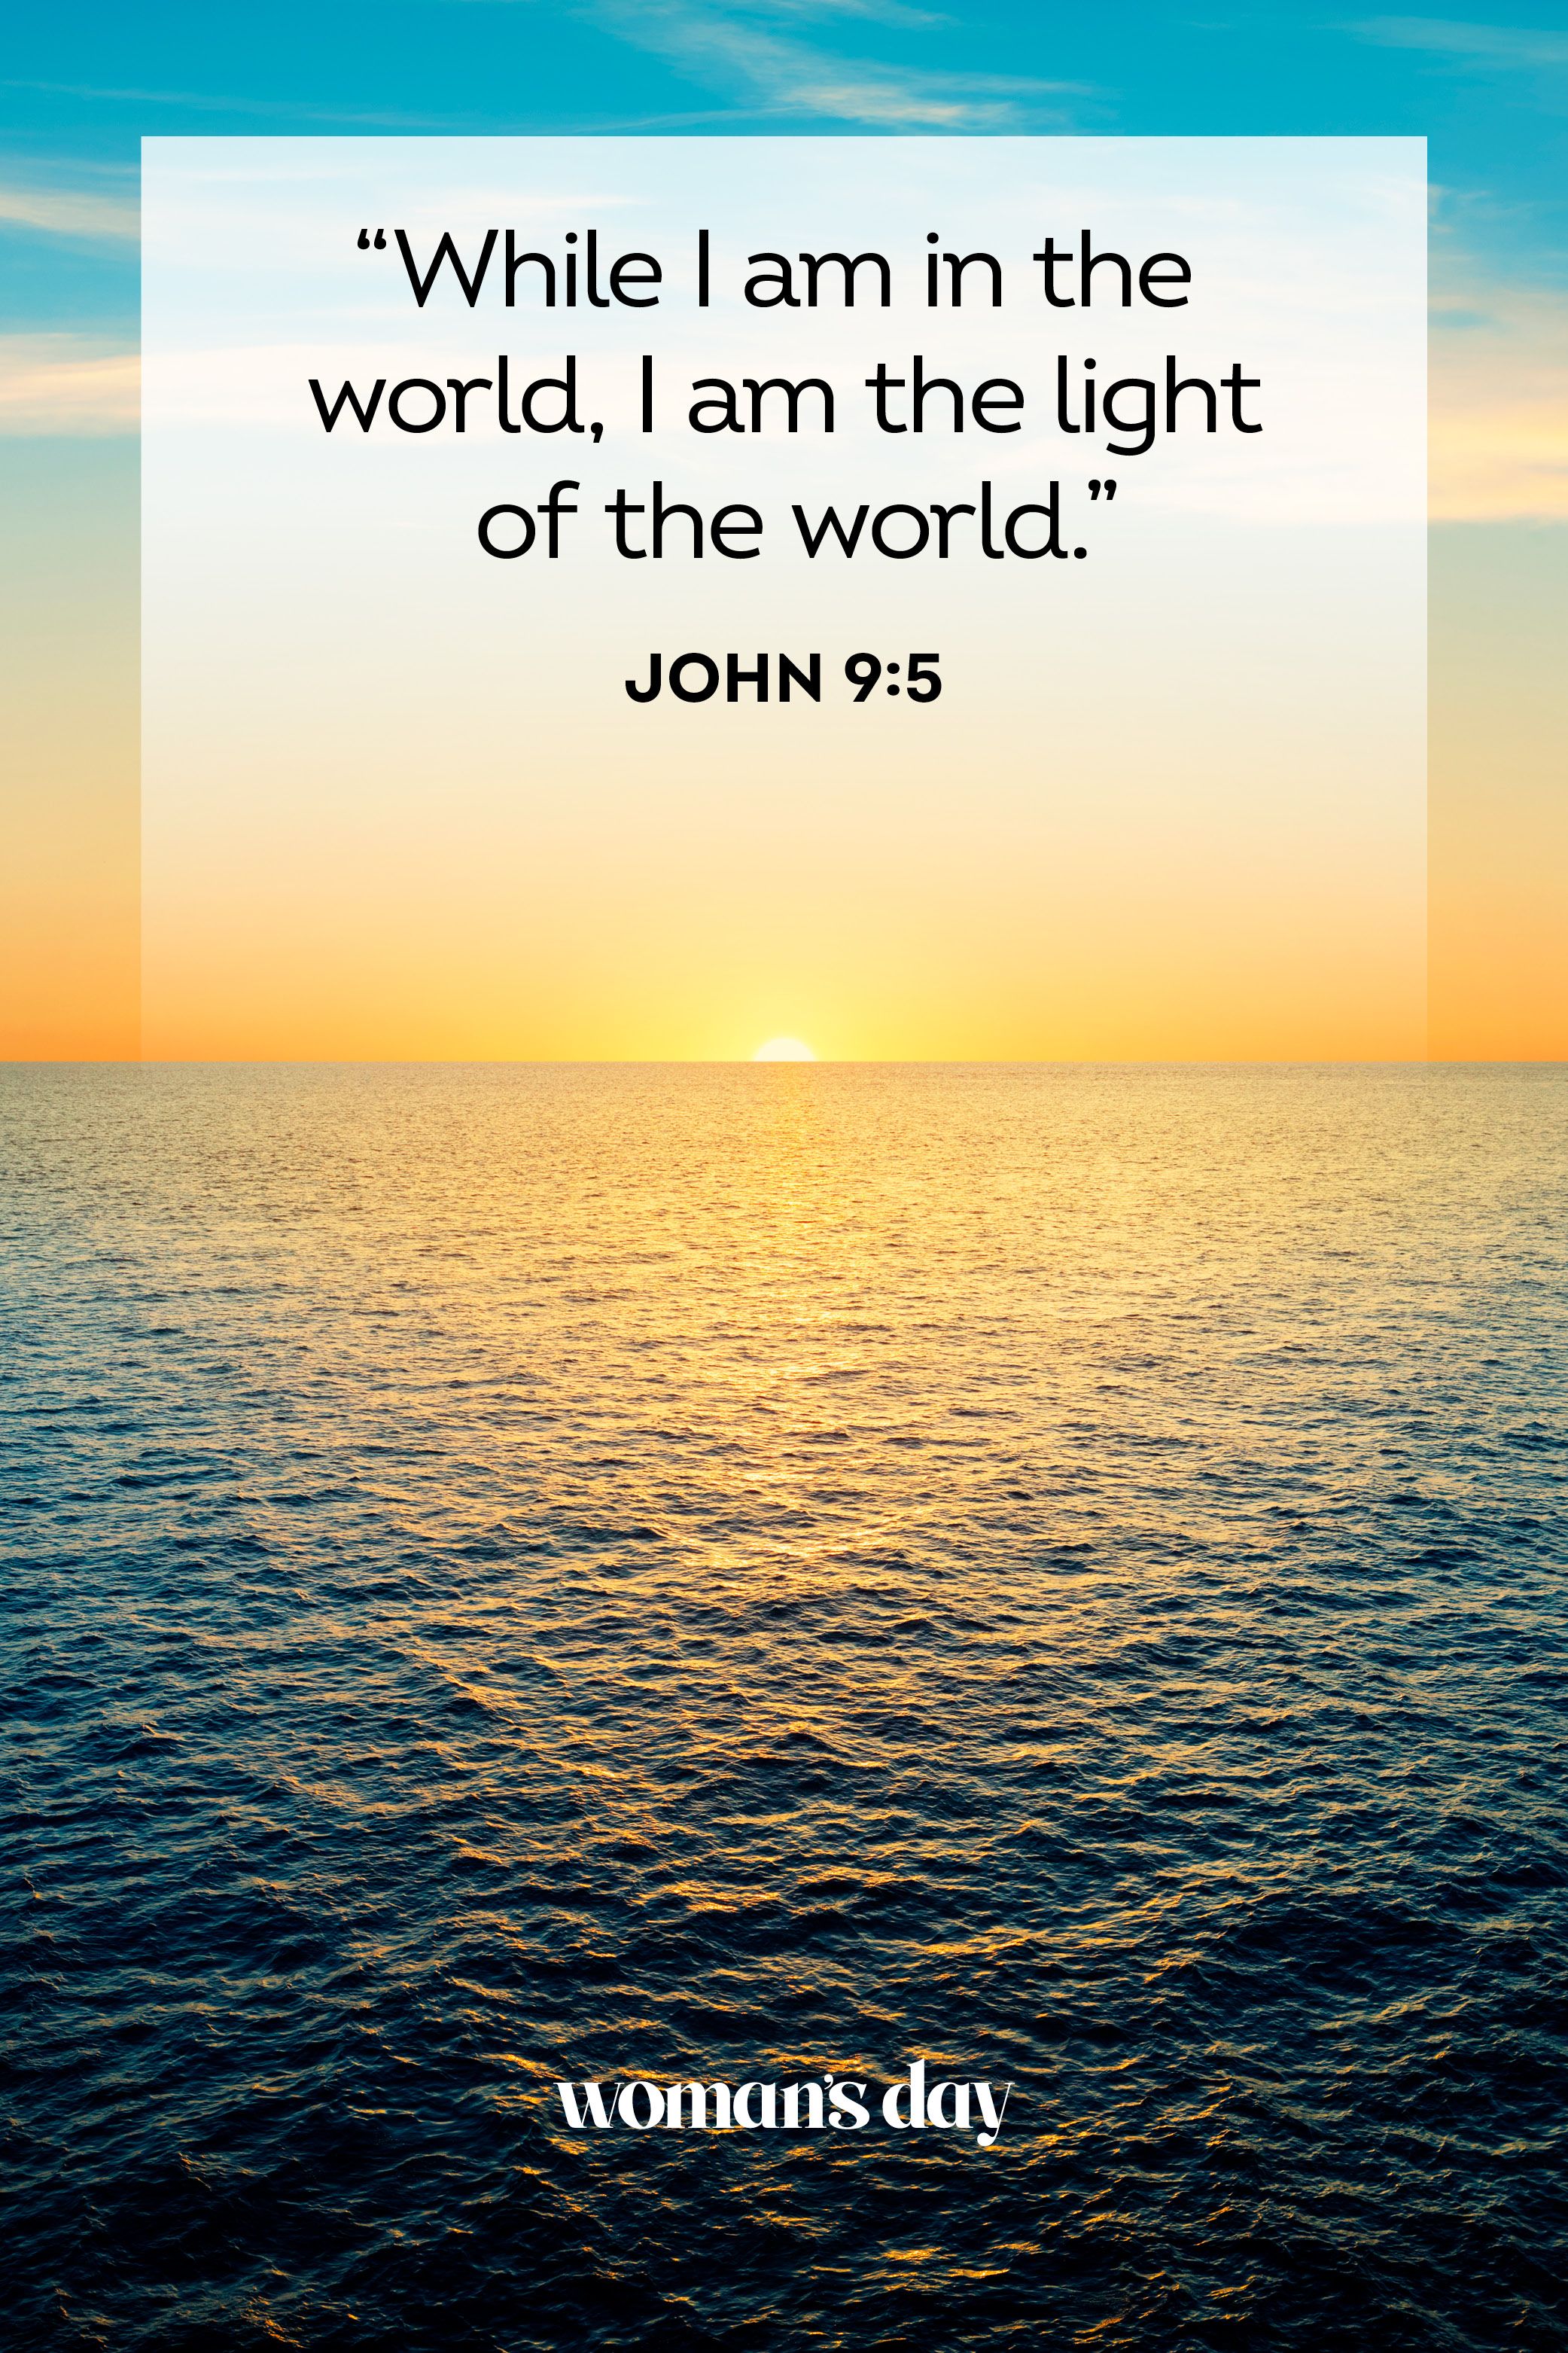 21 Bible Verses About — Scripture about Light in Darkness